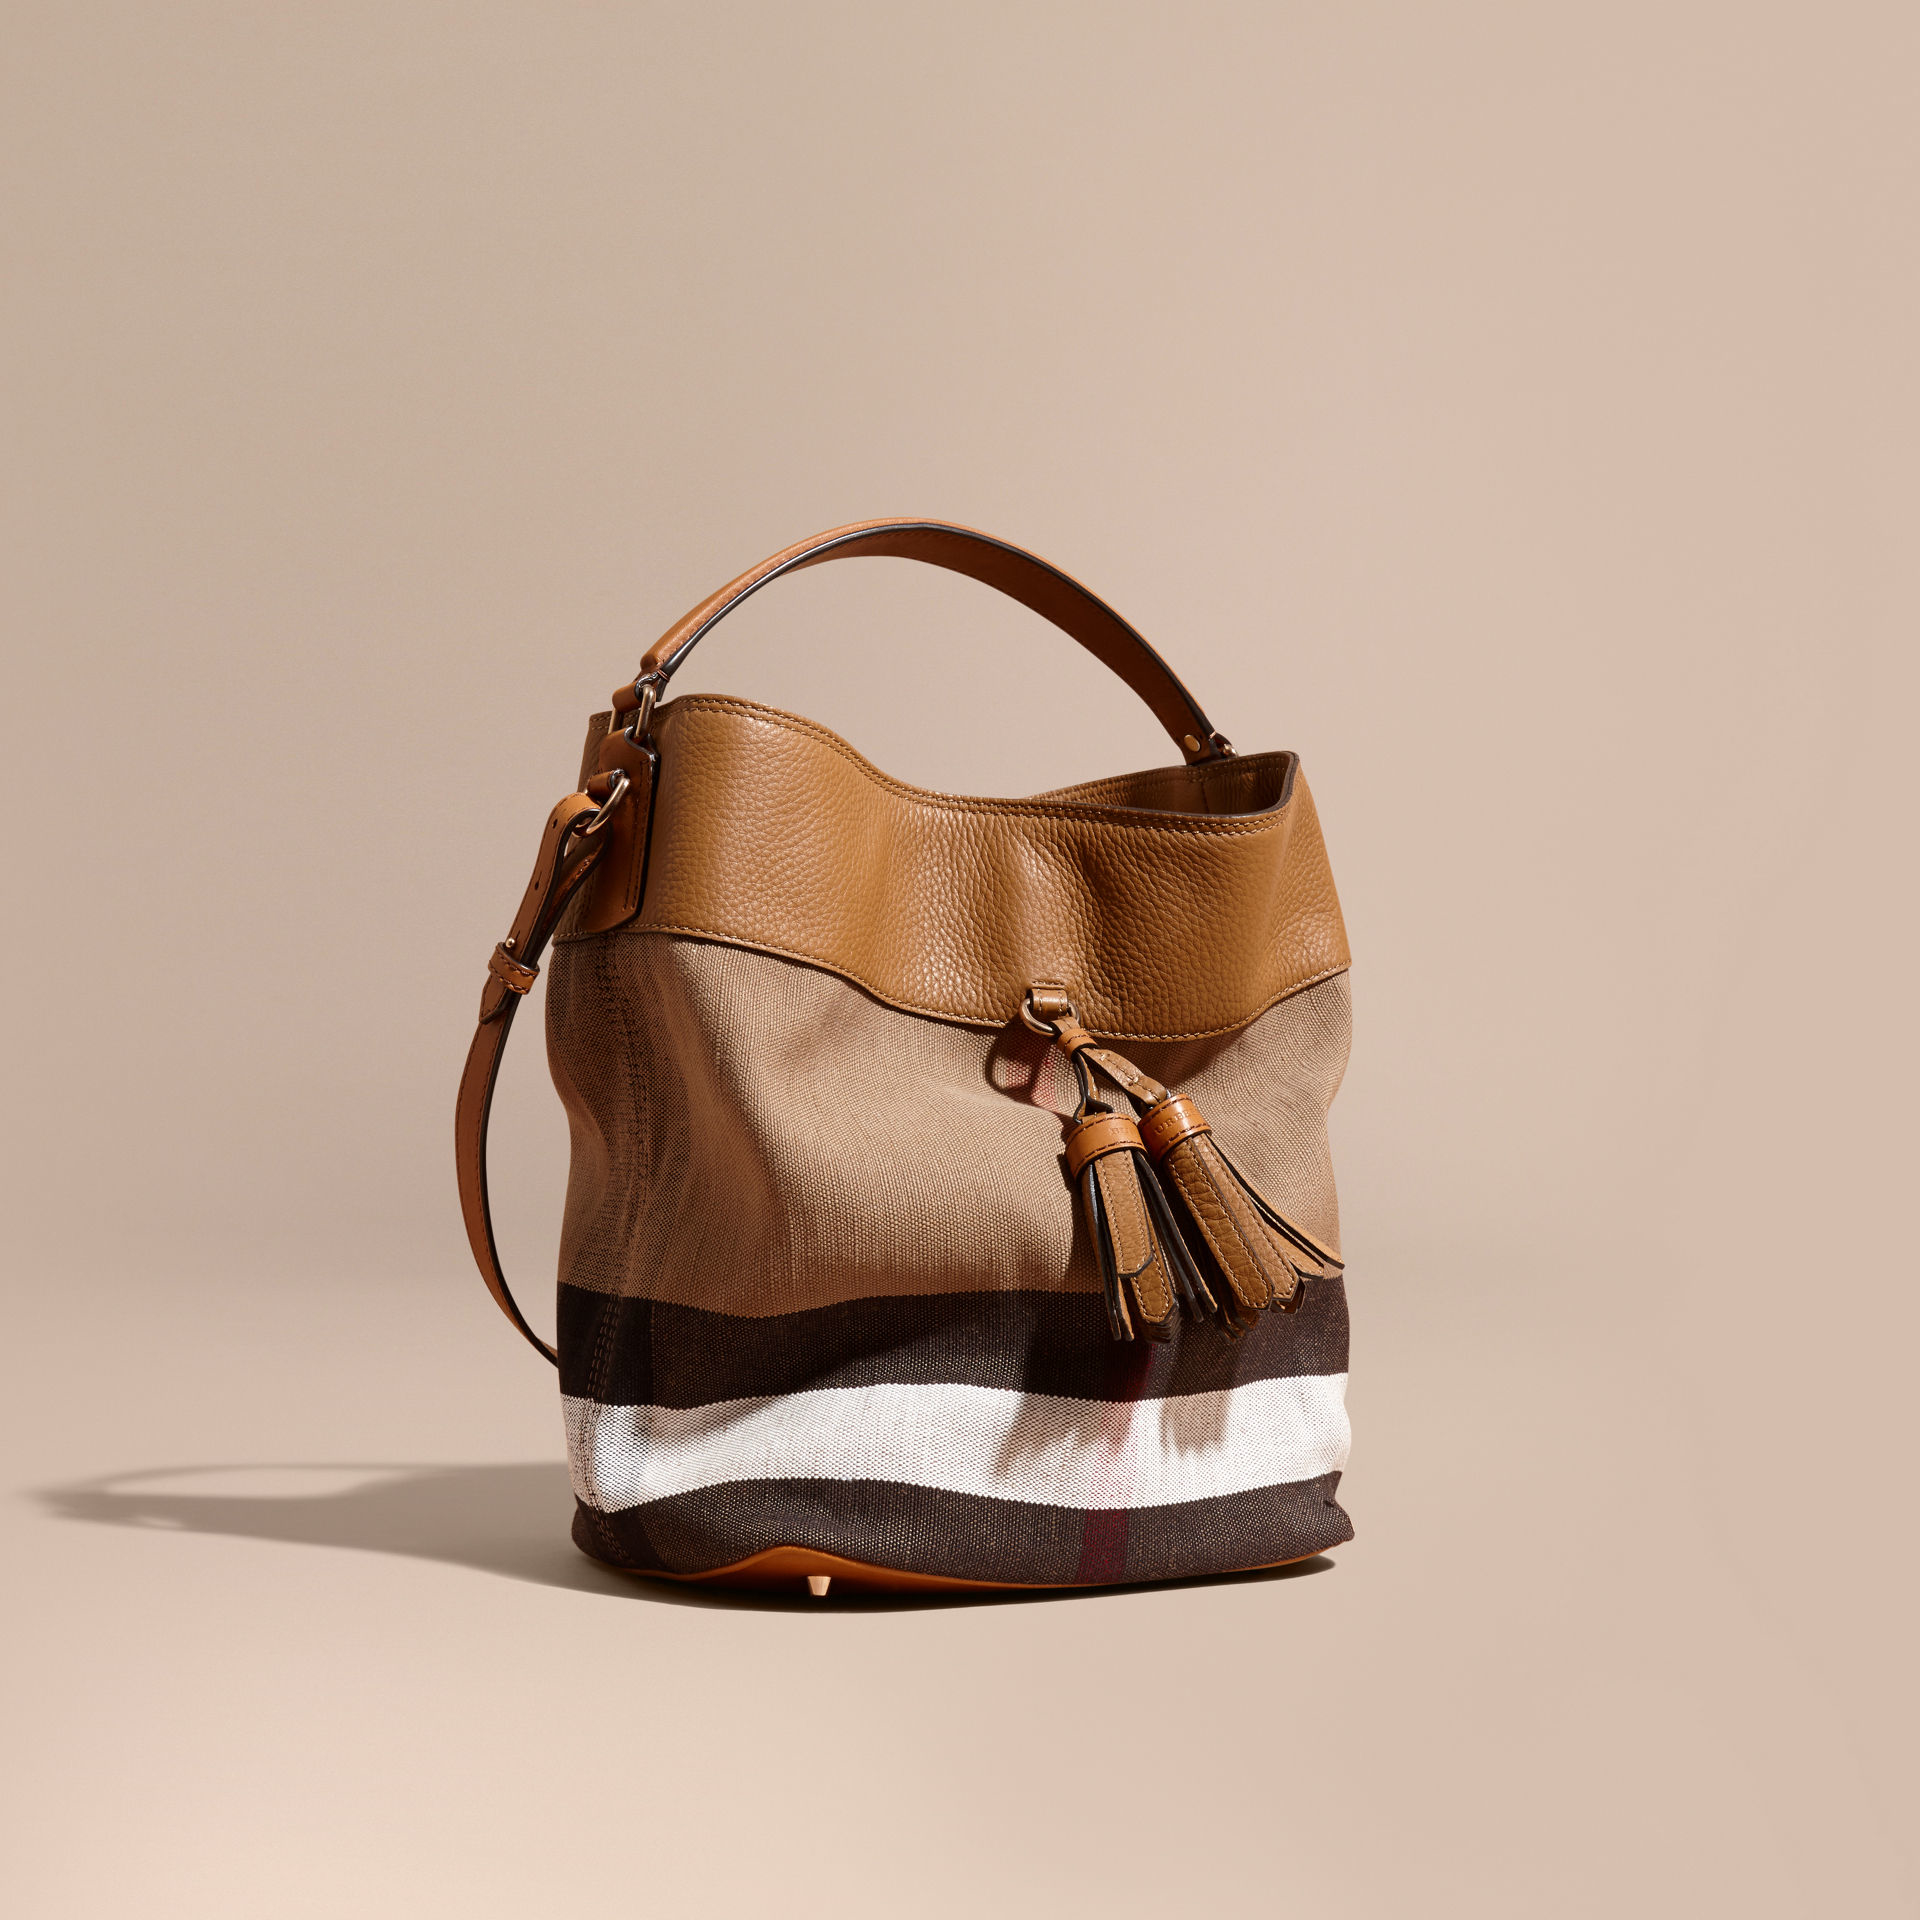 Burberry Medium Canvas Check Hobo Bag in Brown | Lyst